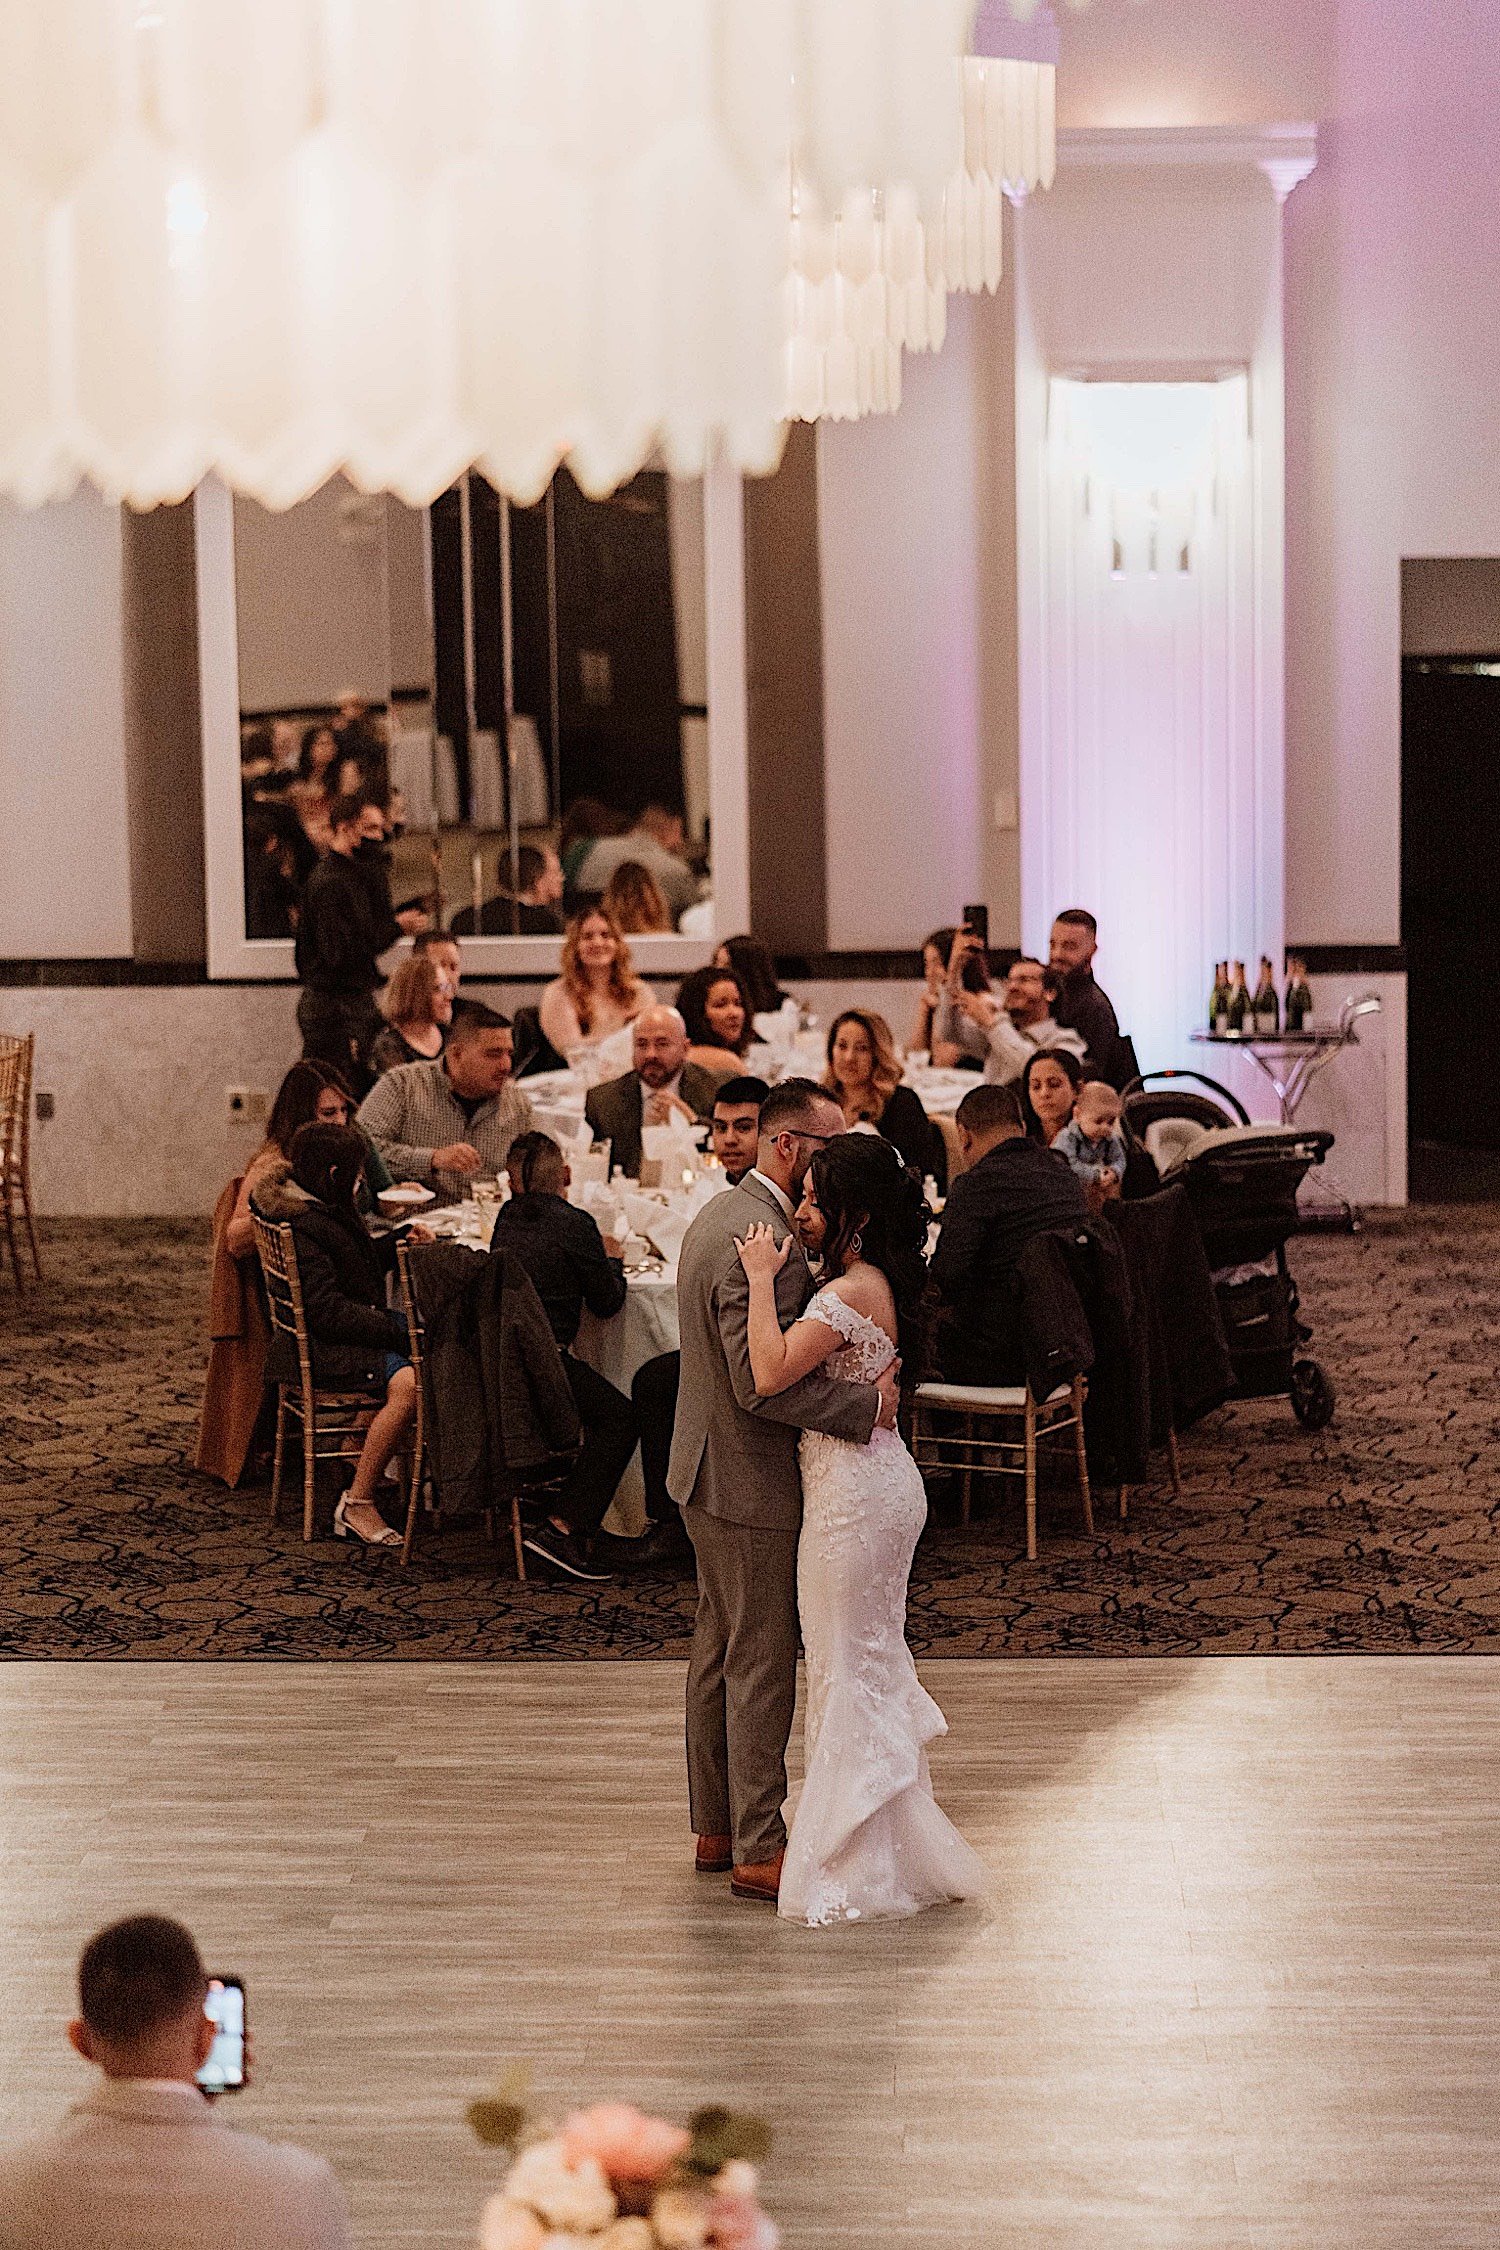 Bride and groom share first dance during wedding reception with guests watching in the background